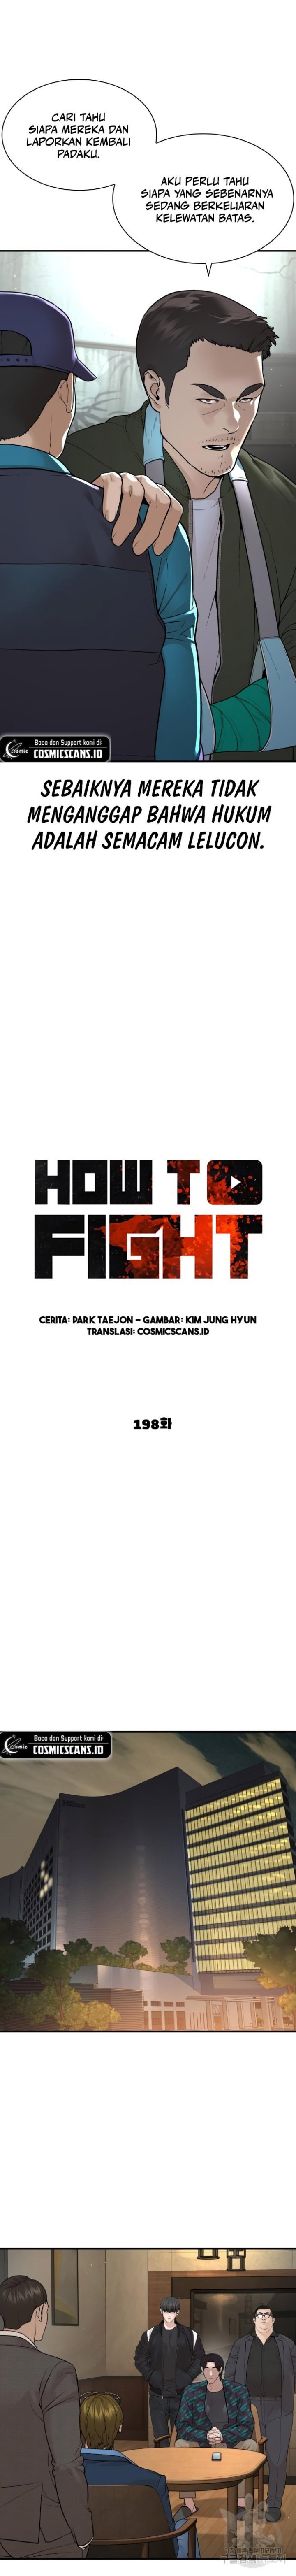 How To Fight Chapter 198